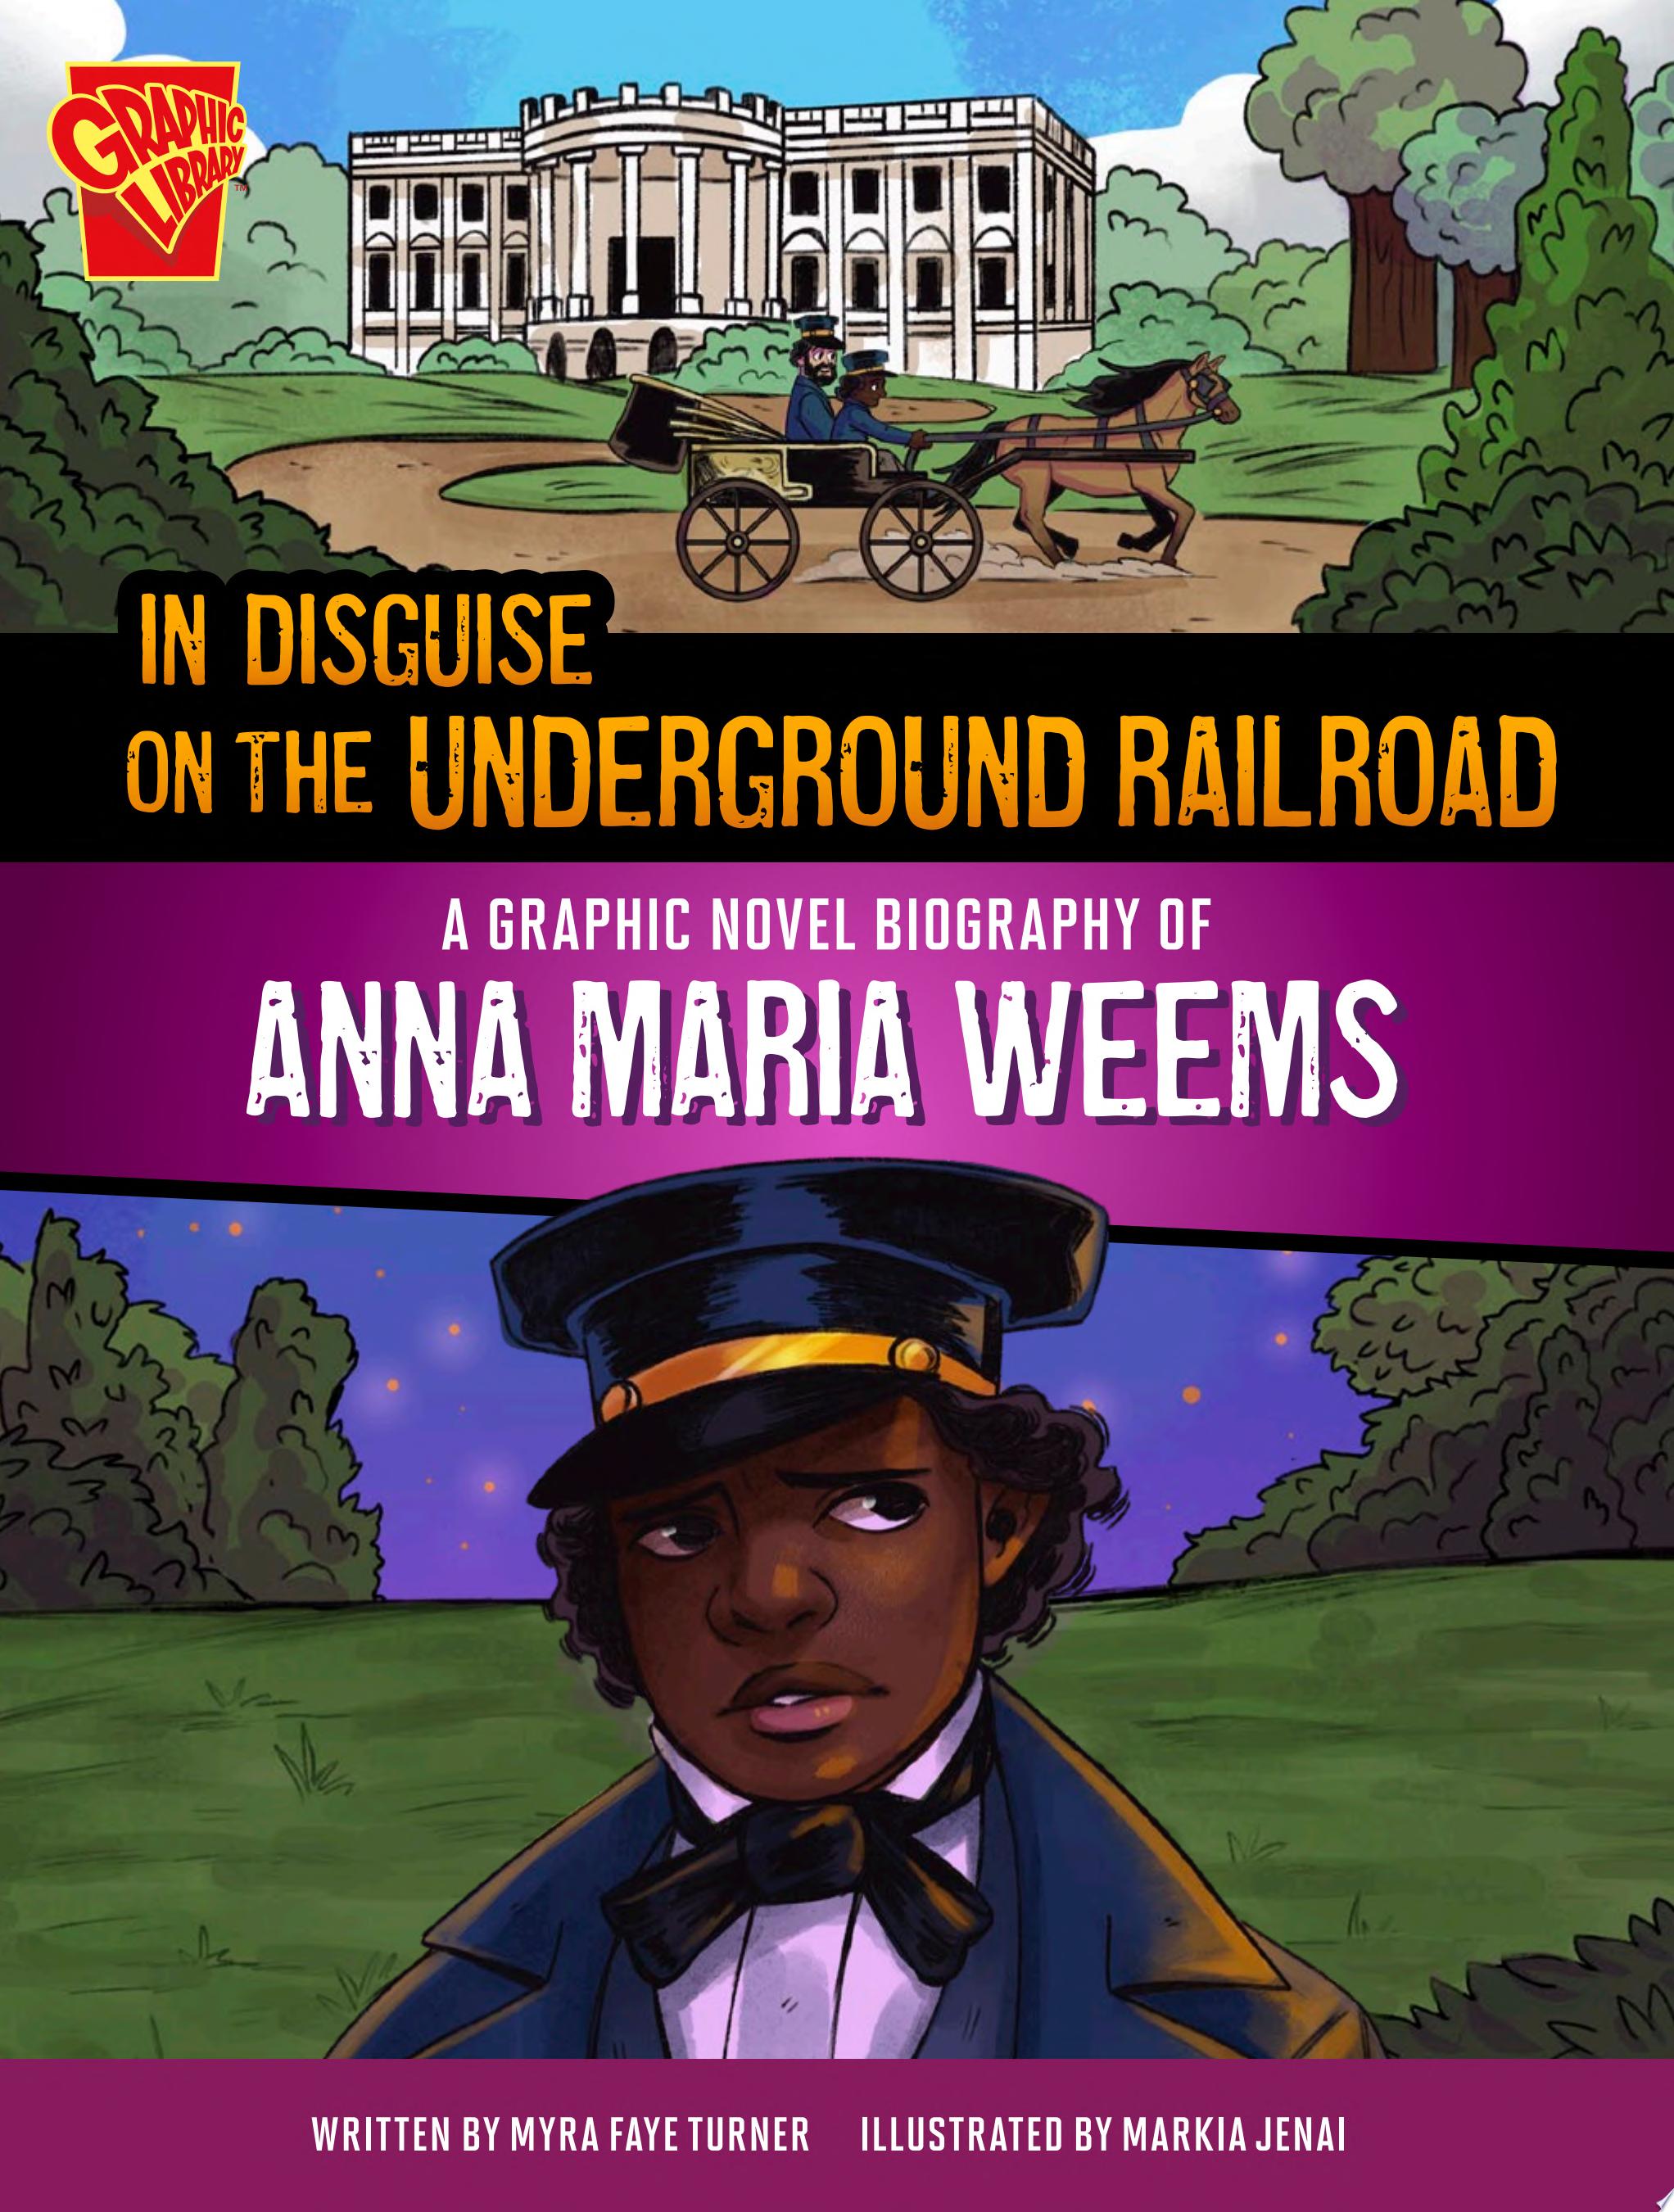 Image for "In Disguise on the Underground Railroad"